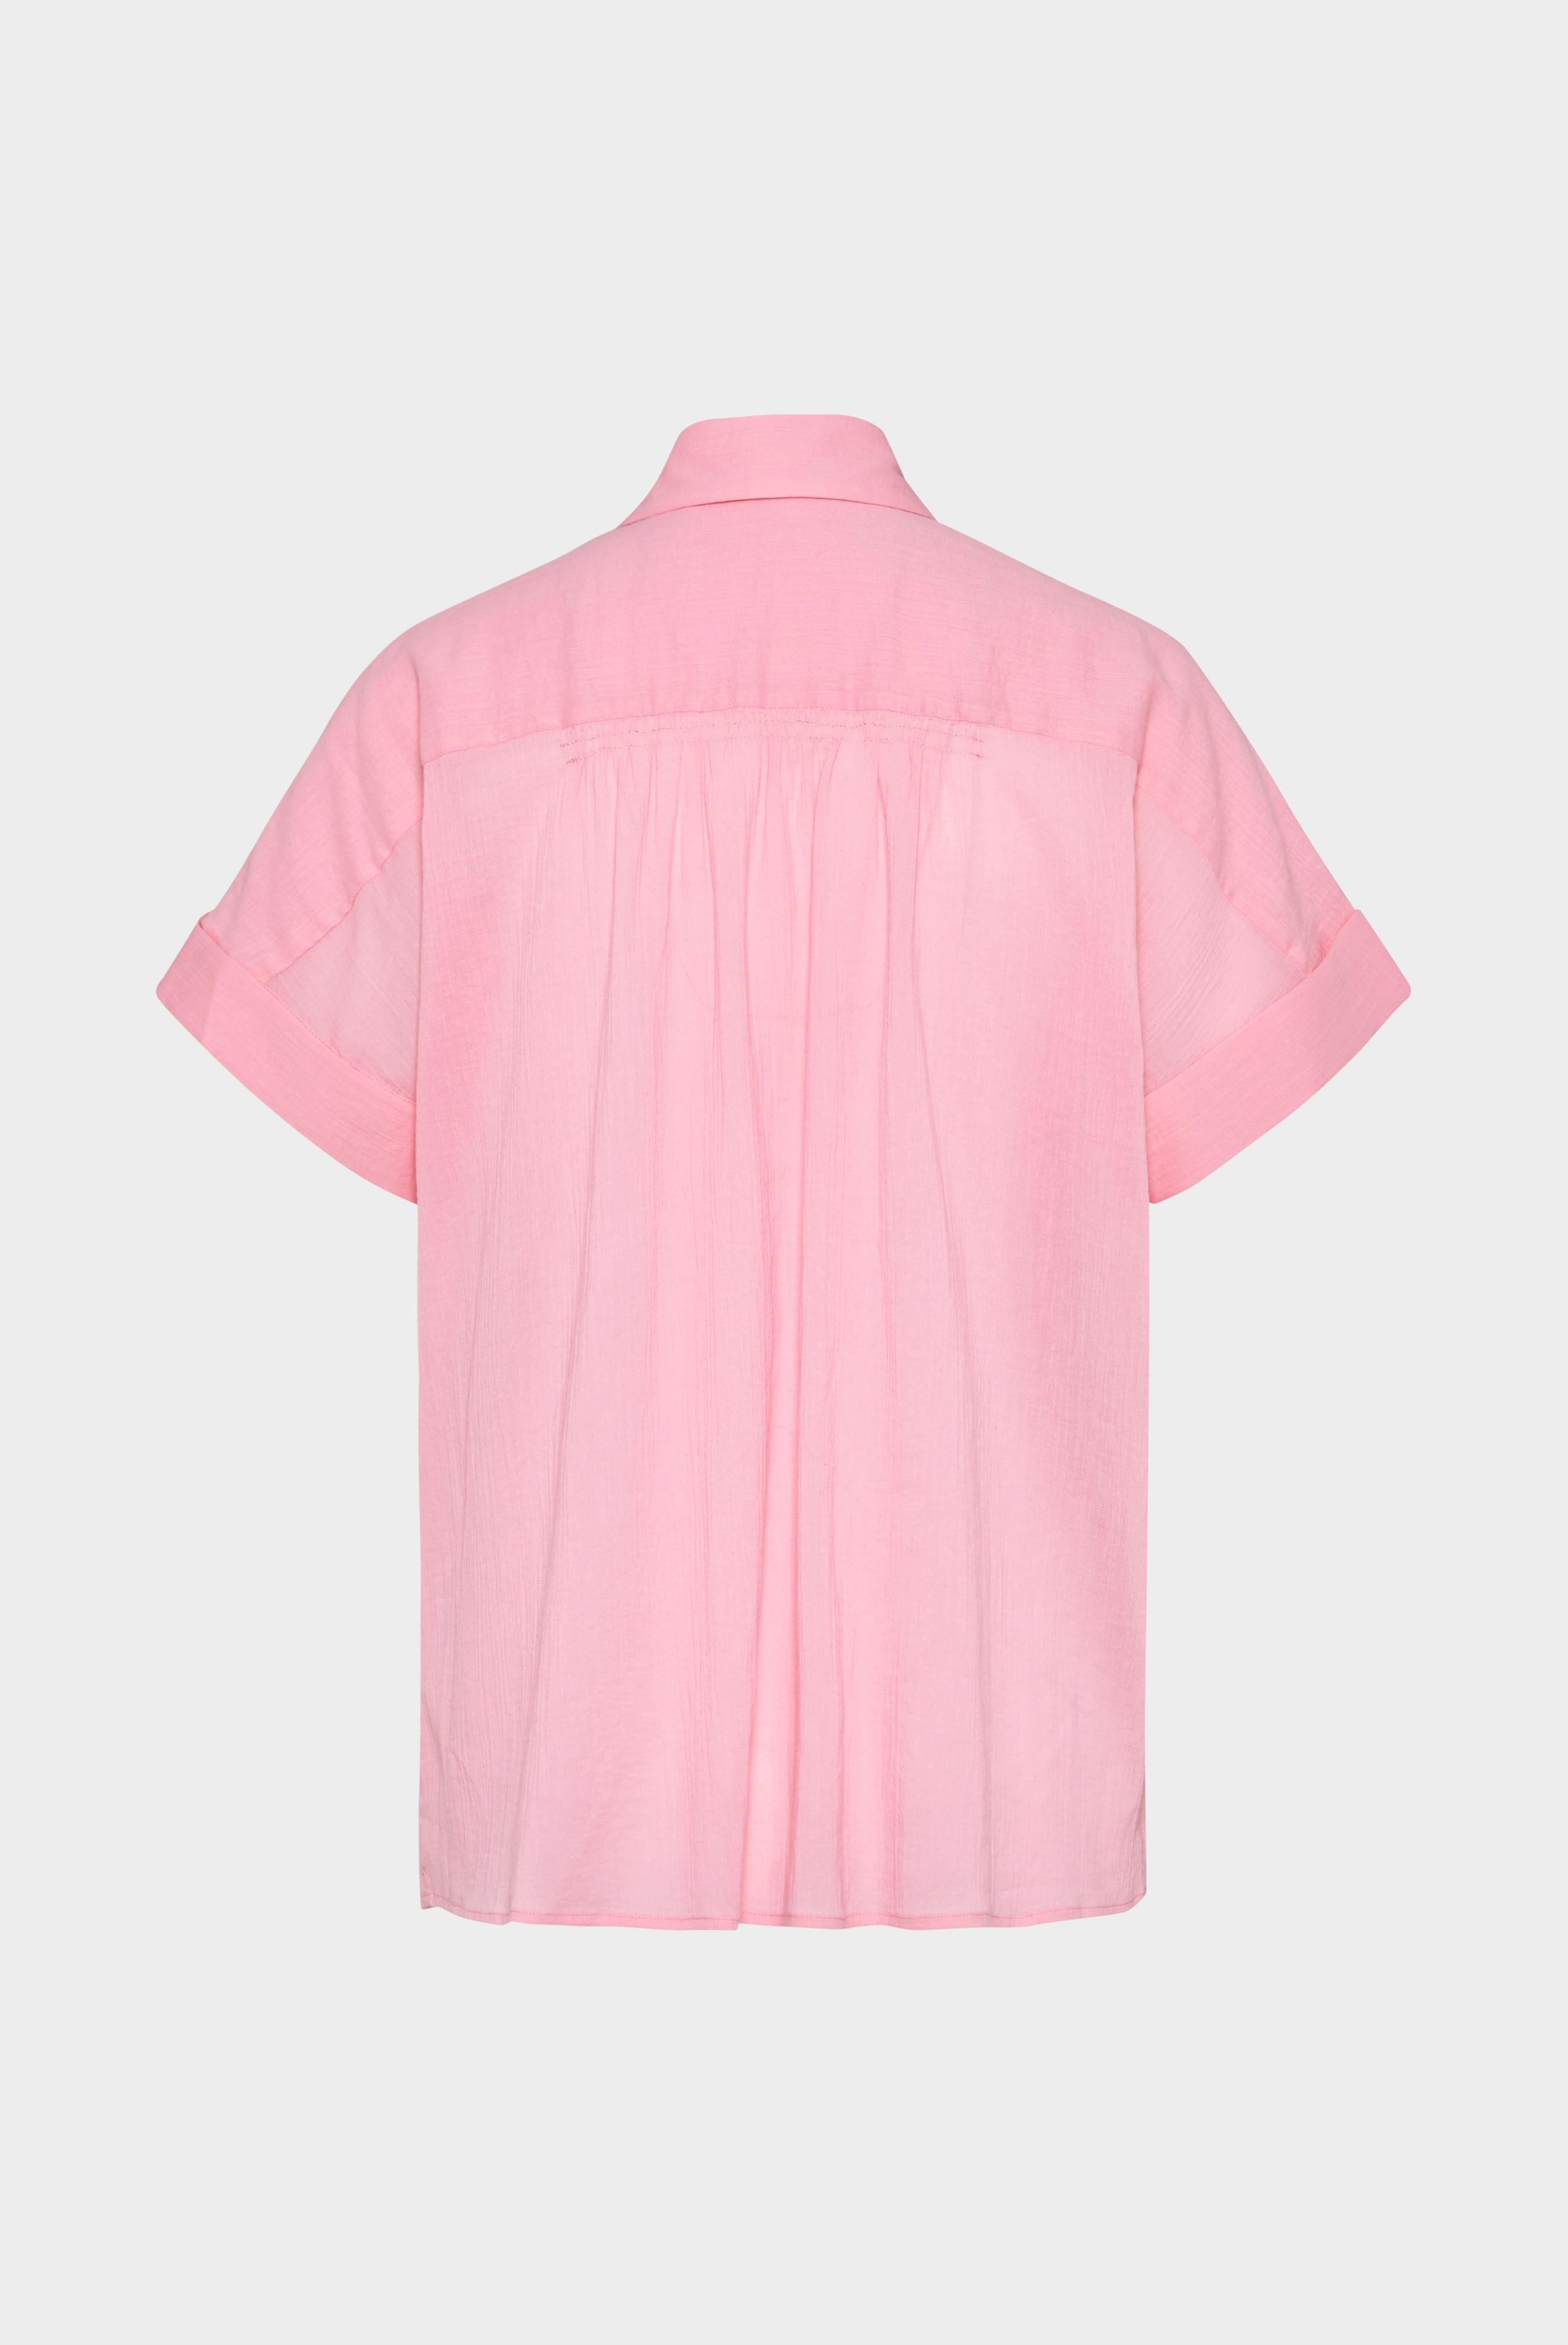 Casual Blouses+Short-sleeved blouse with cap sleeves+05.525R.3D.150112.530.36